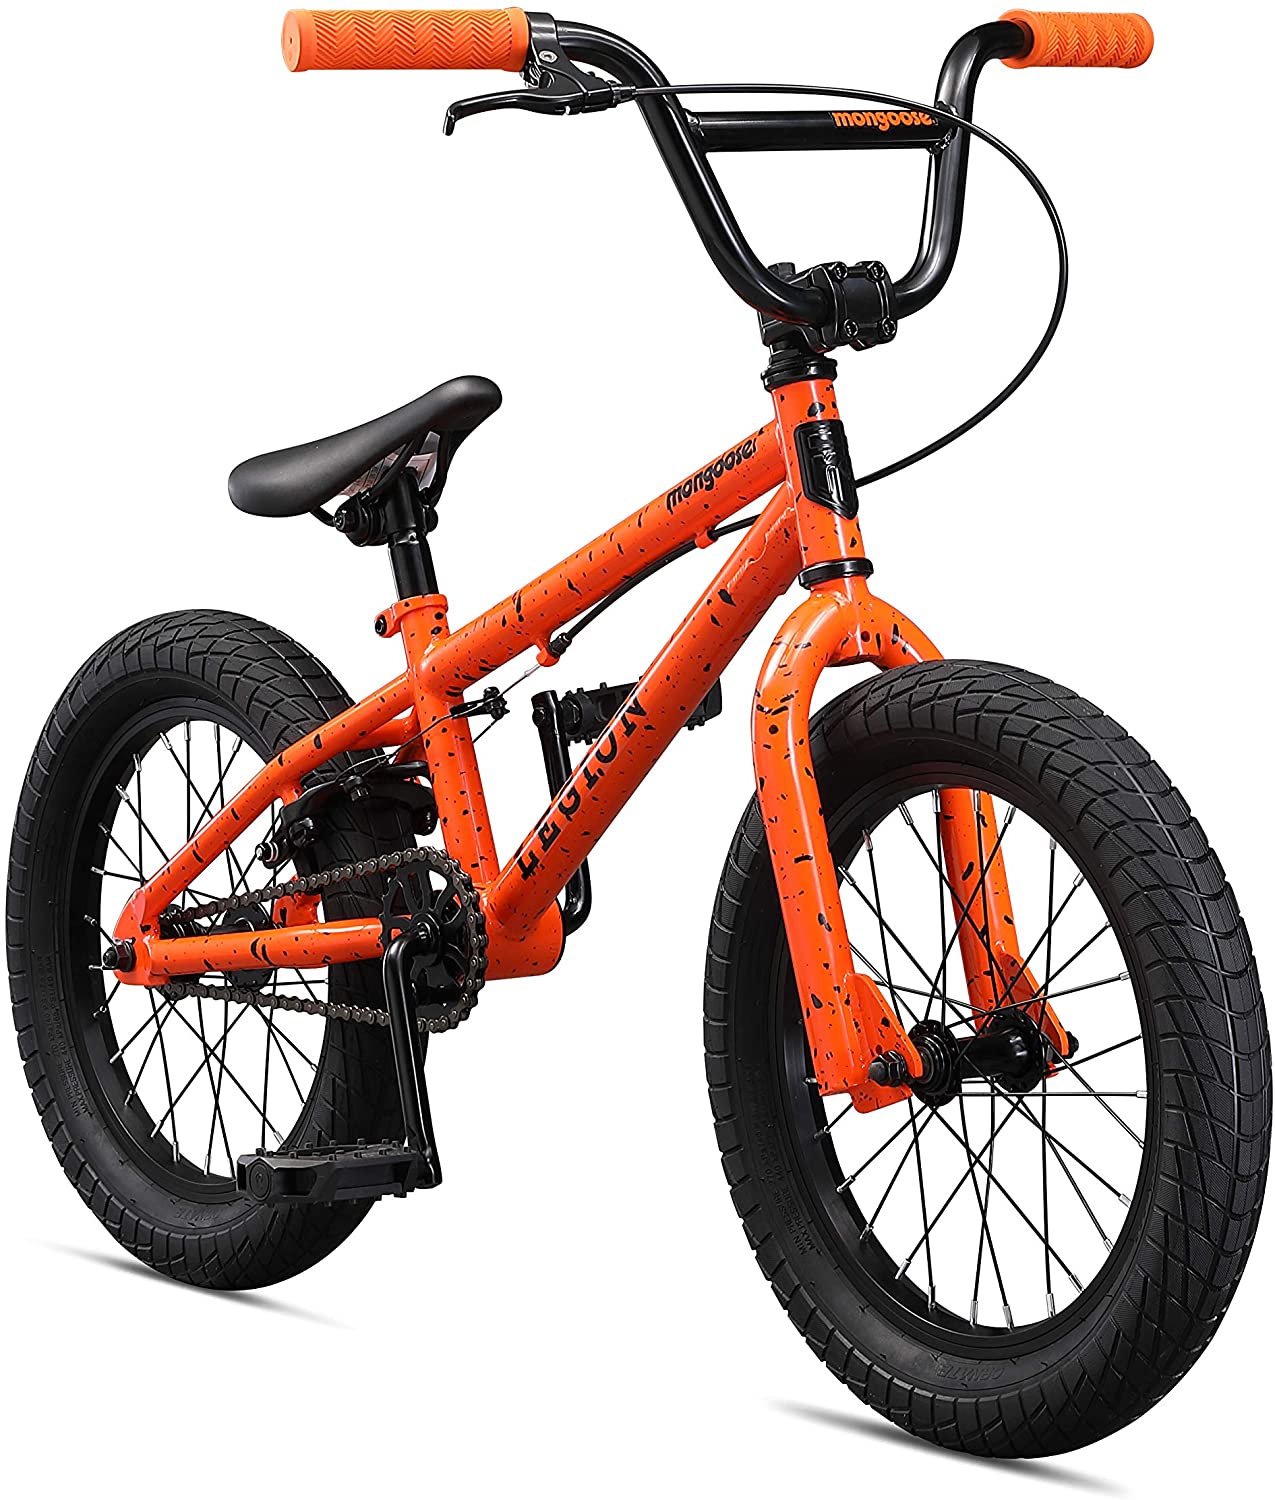 cycle price for 9 year old boy